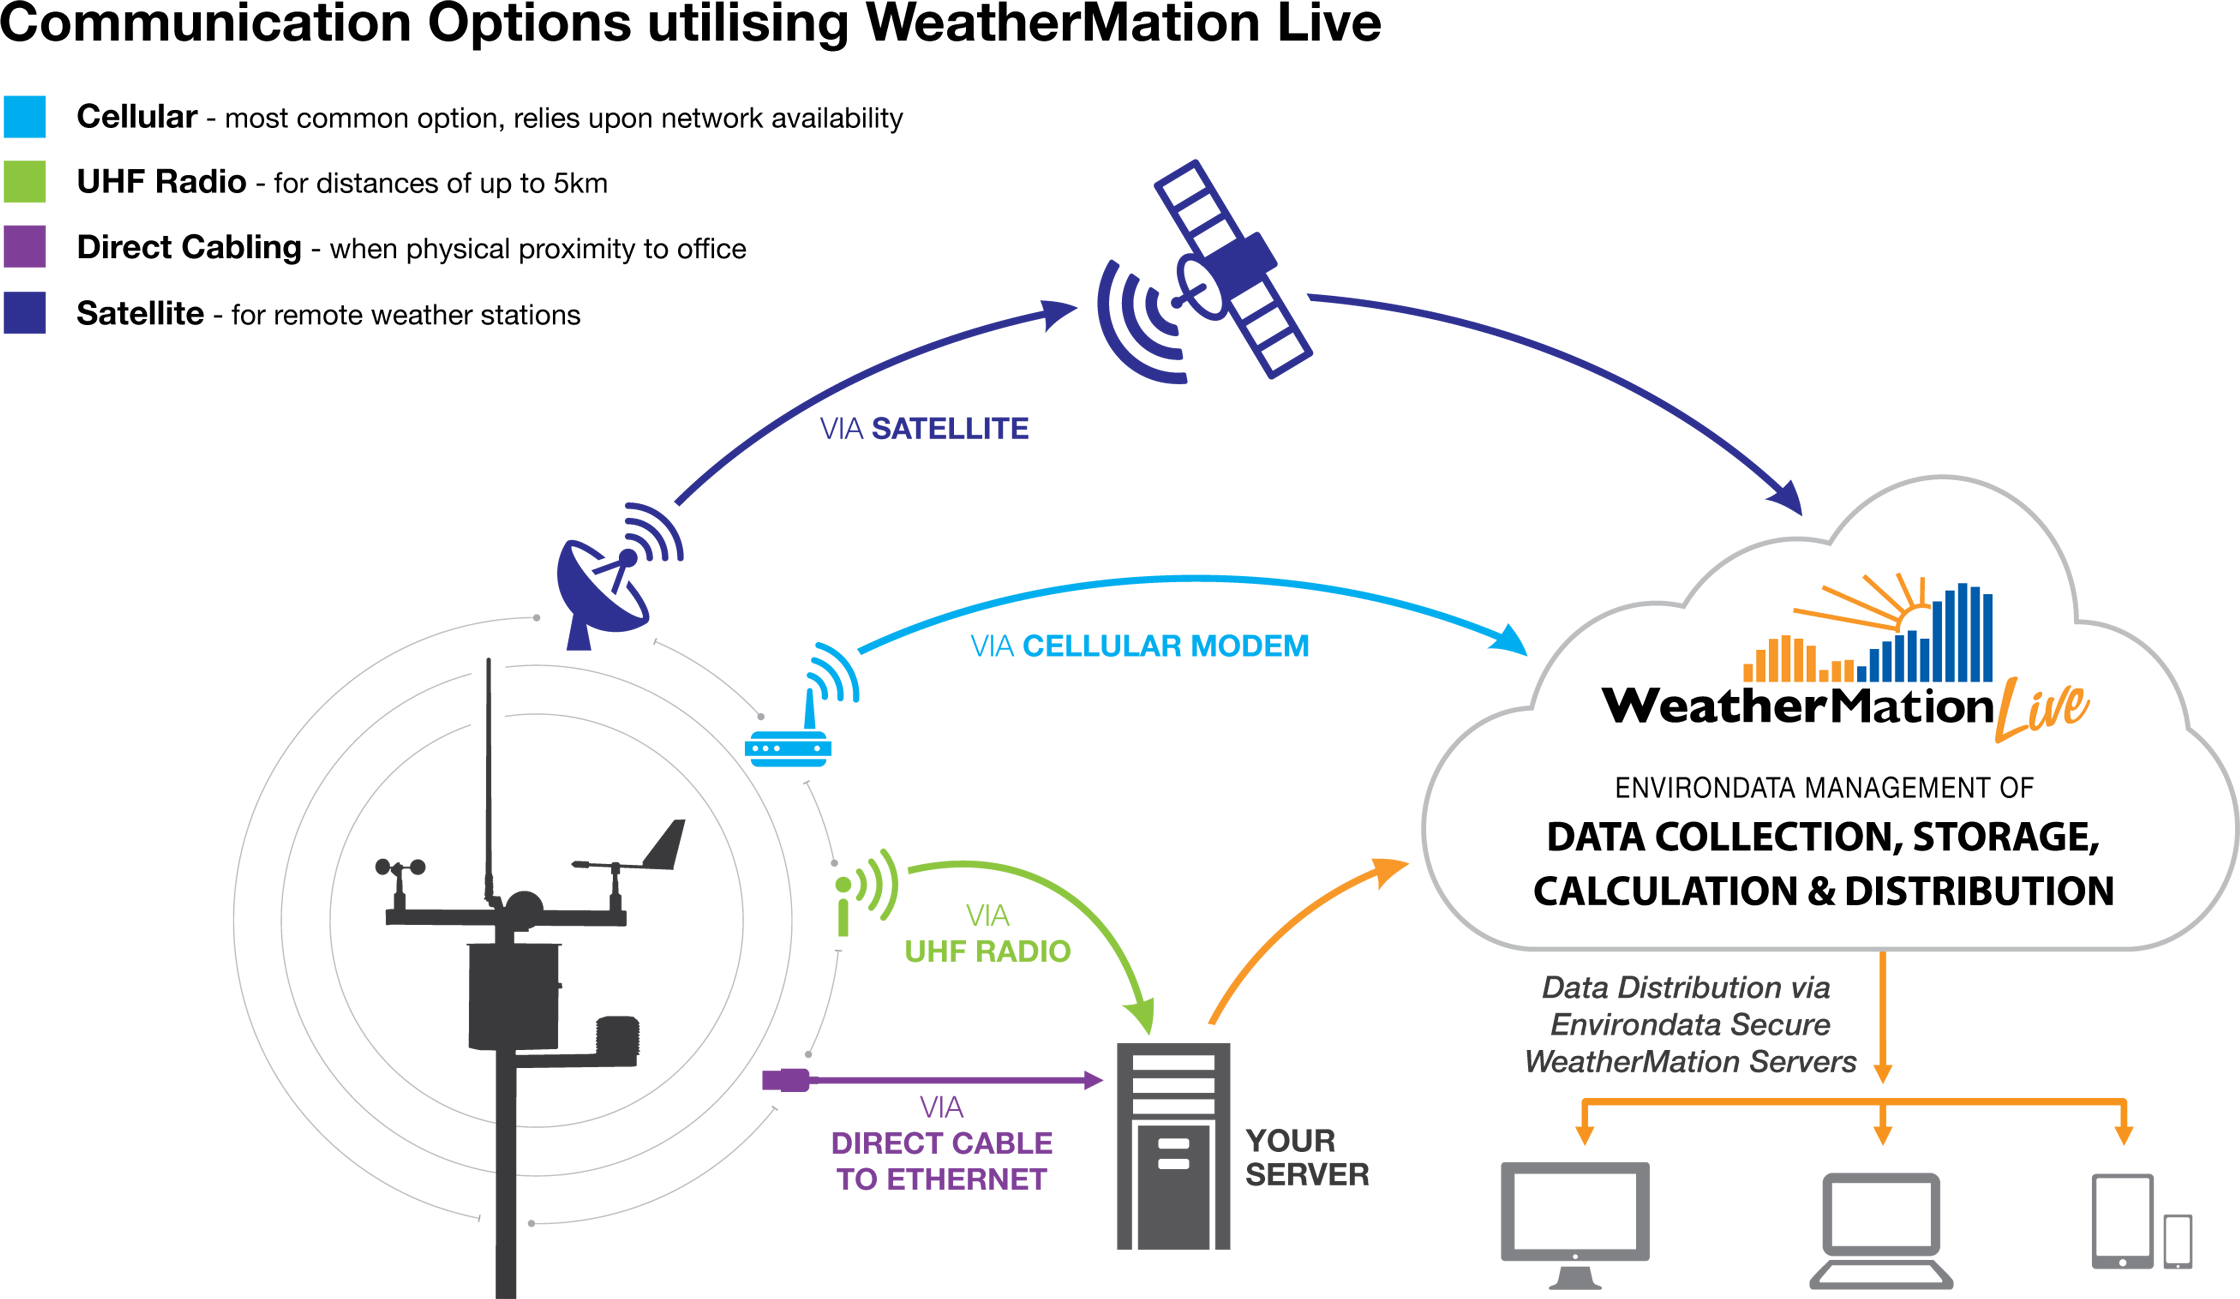 Diagram of Weather Station Communication Options for WeatherMation LIVE via Cable Cellular UHF and Satellite